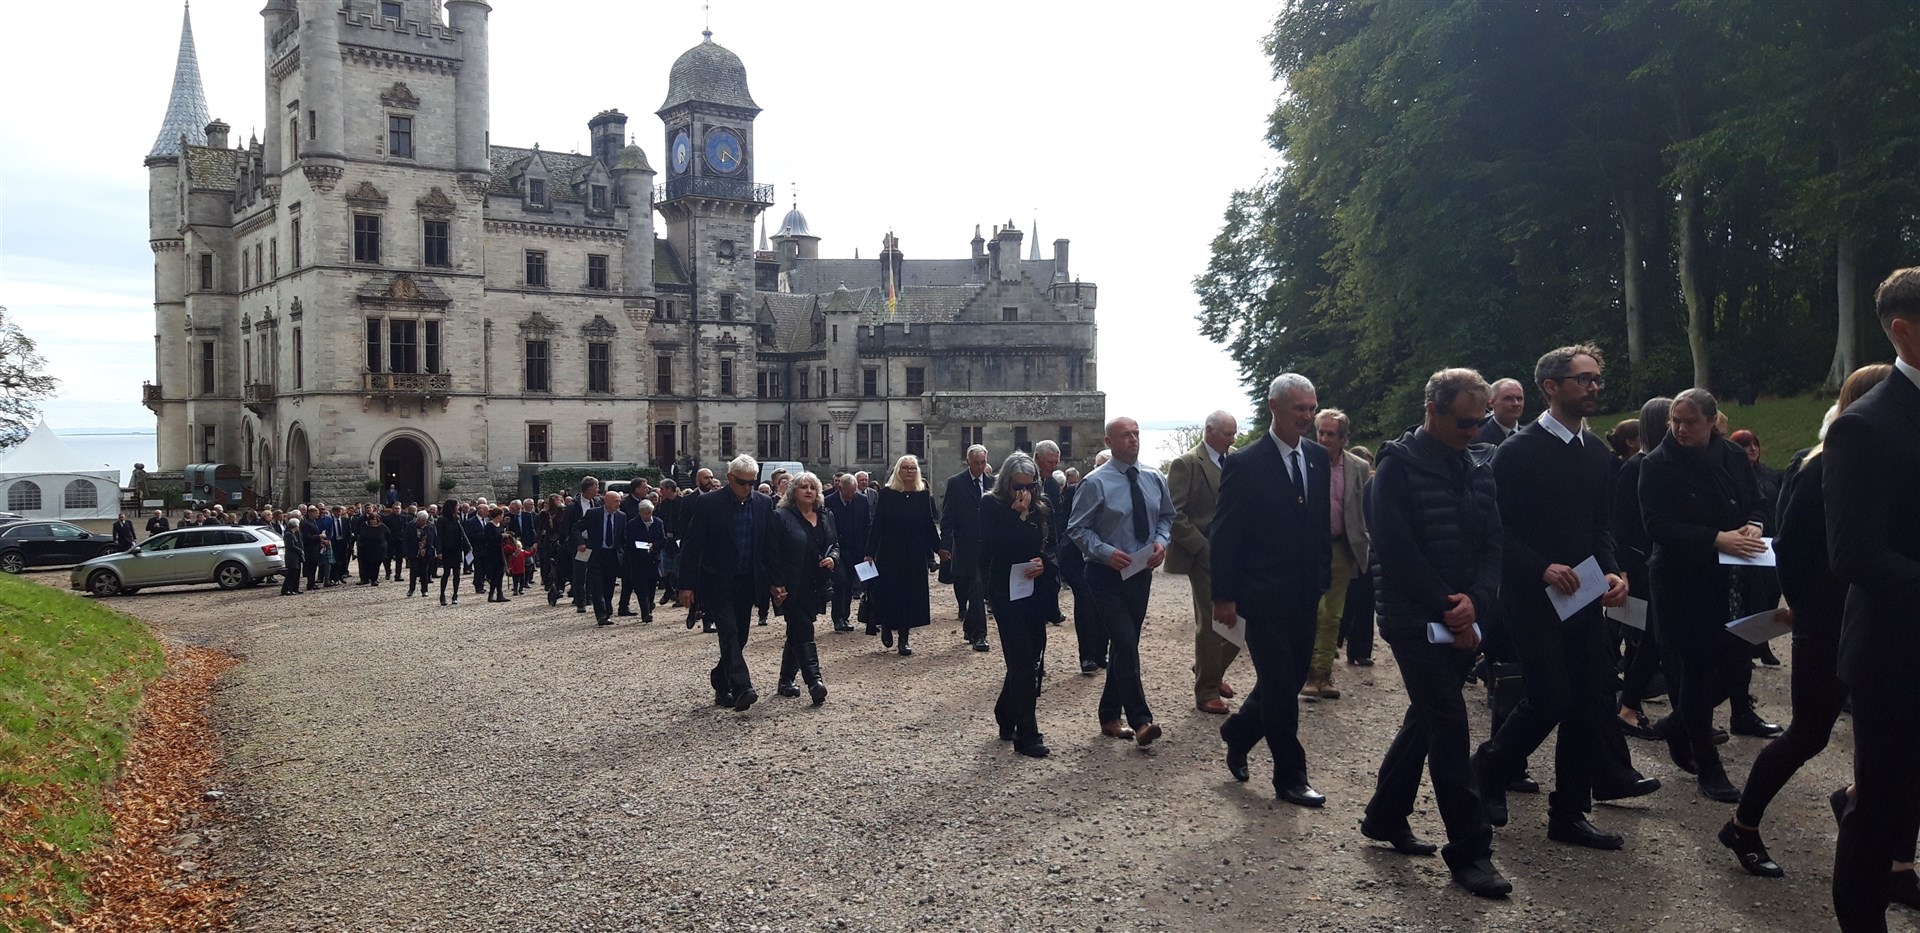 Mourners fell in behind the cortege and forming a long line, followed it to the family cemetery in the castle grounds.